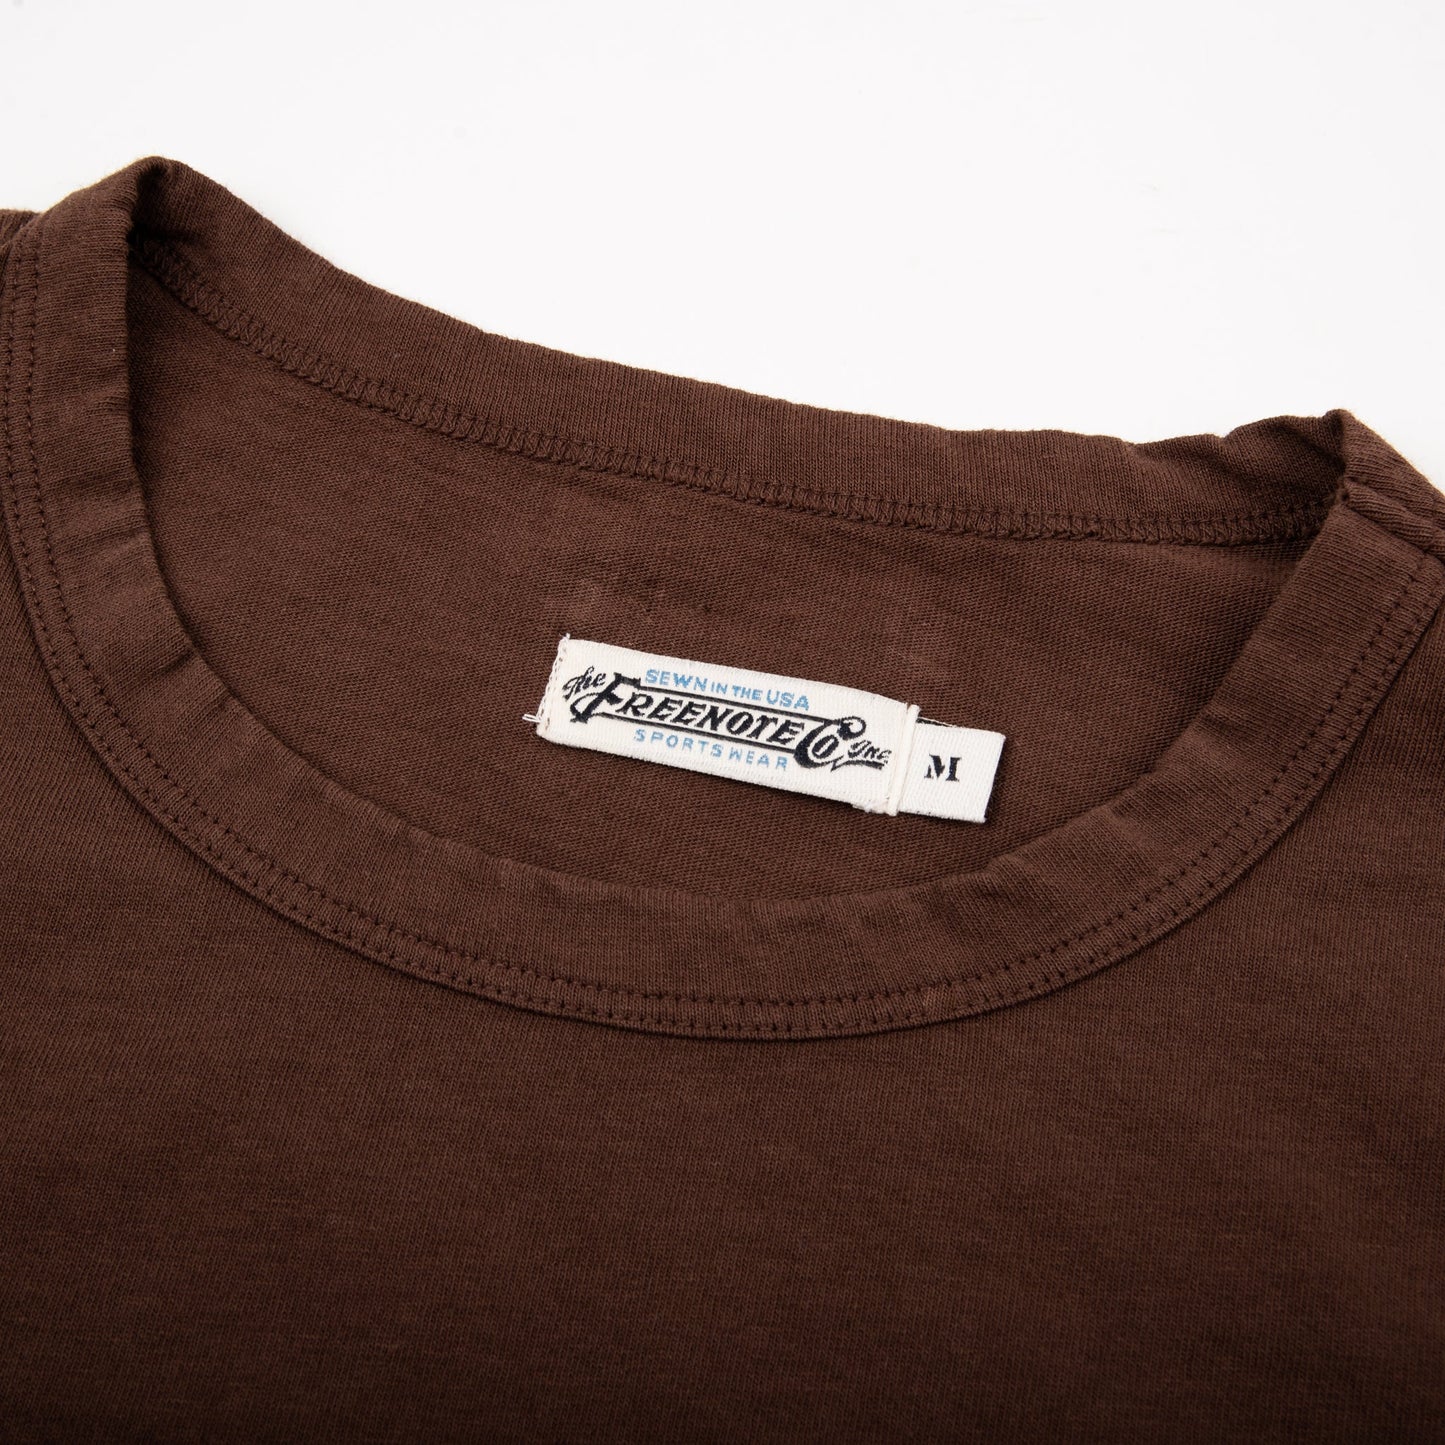 9 Ounce Pocket T-shirt in Chocolate